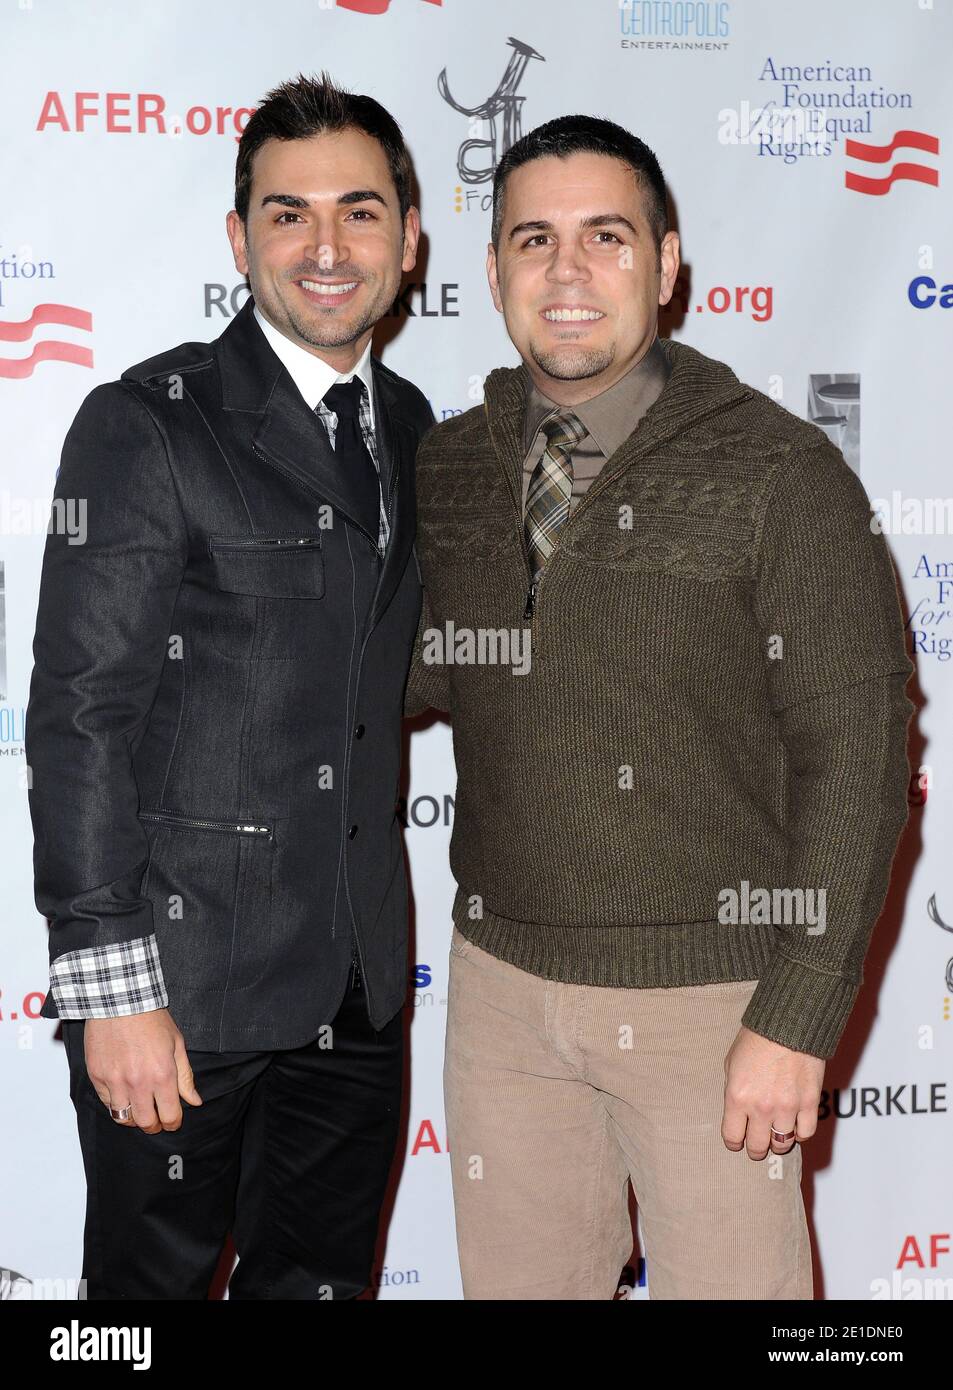 Plaintiffs Paul Katami & Jeff Zarrillo attend Elton John's Private Benefit Concert for the American Foundation for Equal Rights at the Ron Burkle residence. American Foundation for Equal Rights (AFER), the sole sponsor of the federal court challenge to California?s Prop. 8, Perry v. Schwarzenegger. Los Angeles, January 19, 2011. Photo by Lionel Hahn/ABACAPRESS.COM Stock Photo